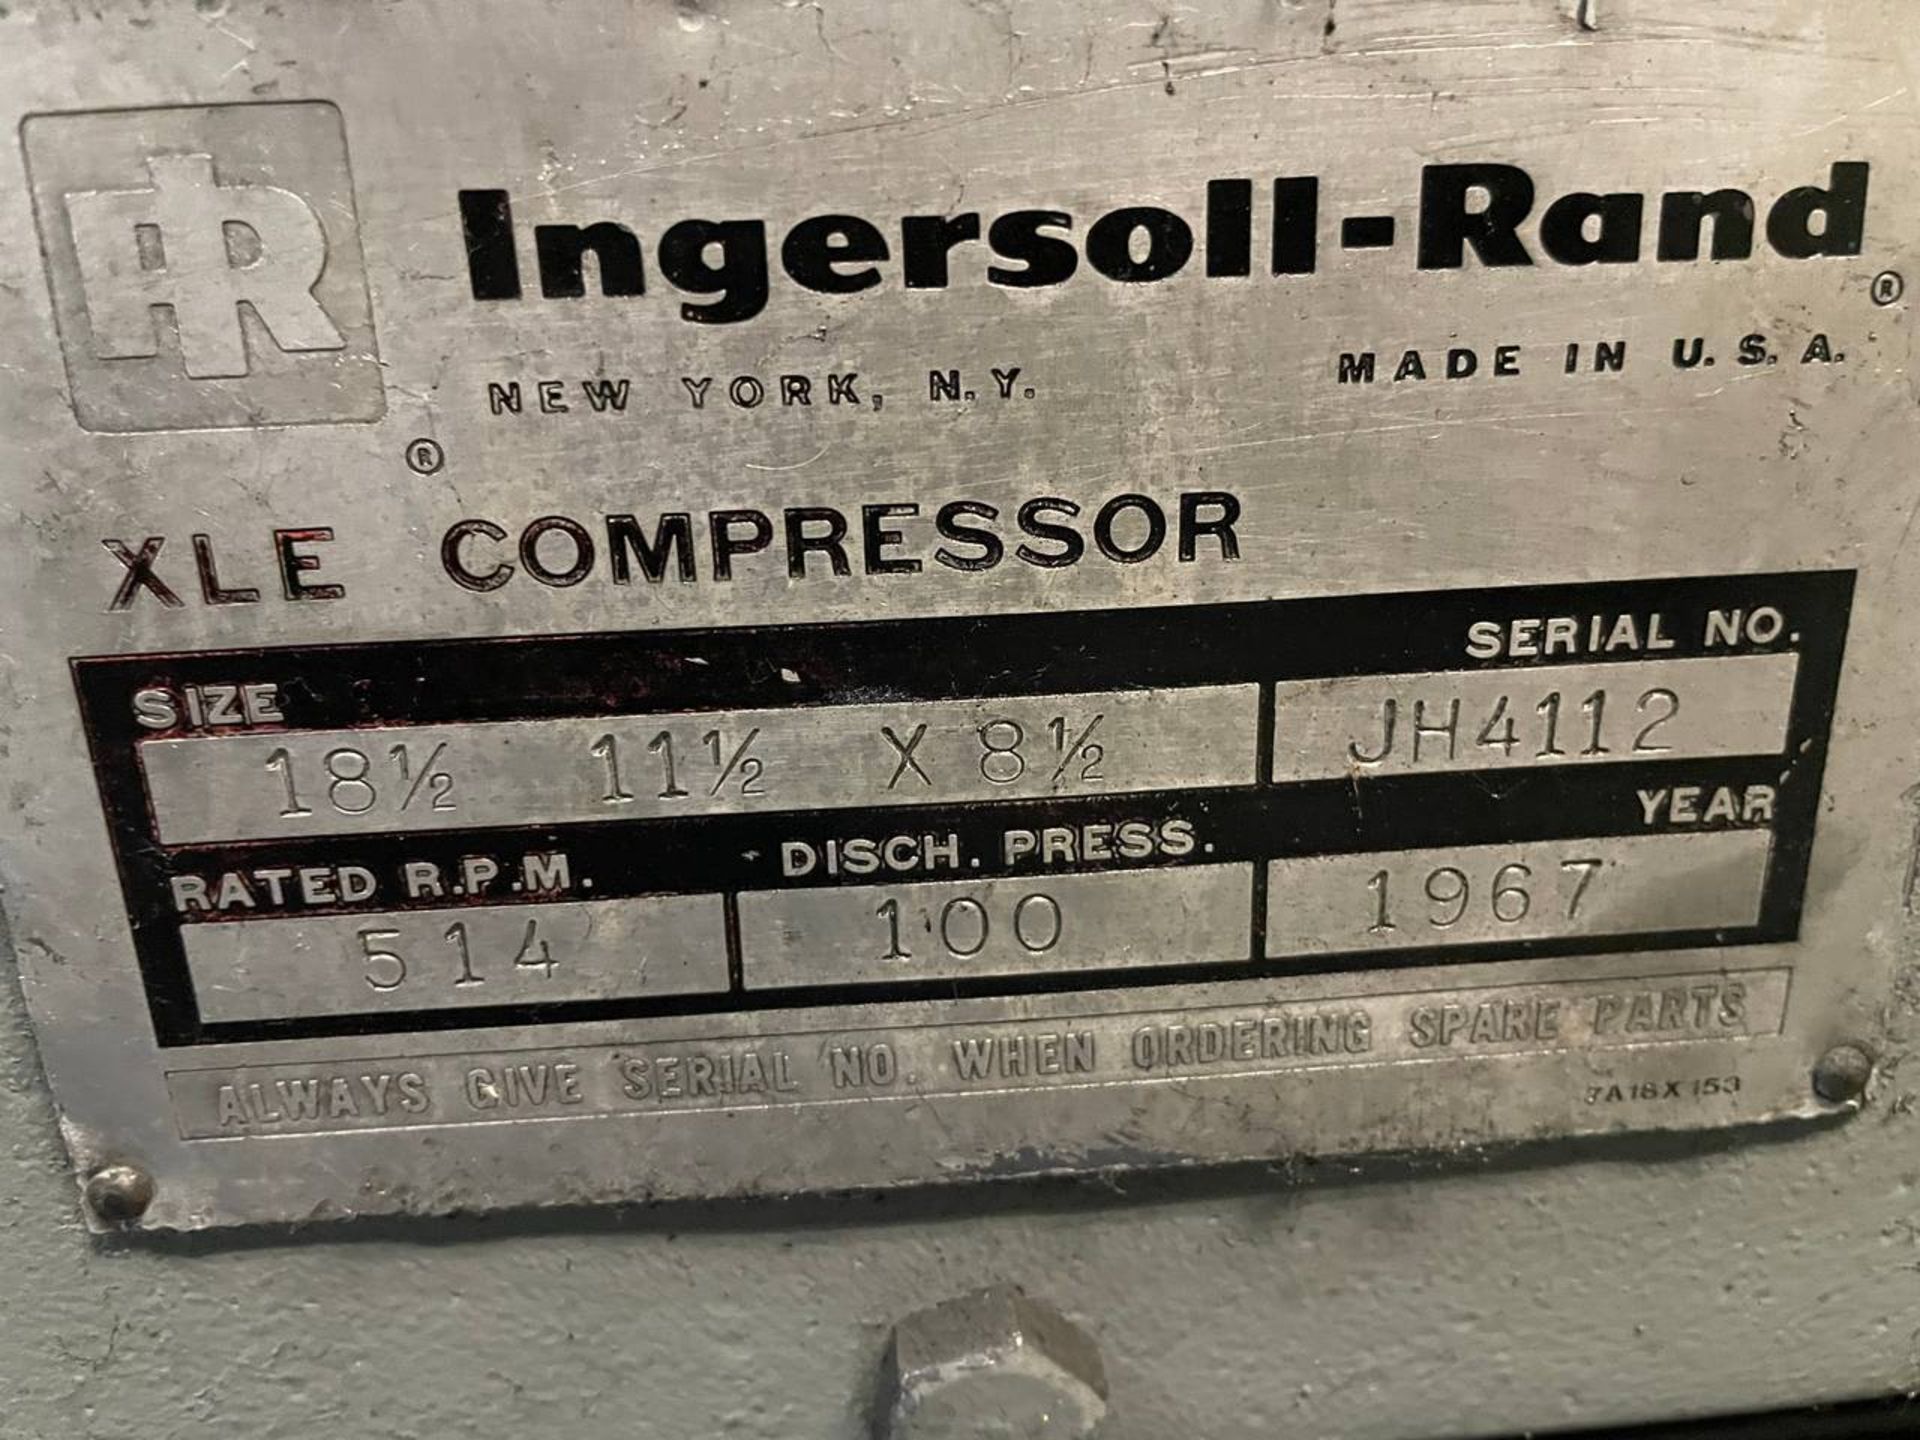 1967 Ingersoll Rand XLE Air Compressor - Image 2 of 6